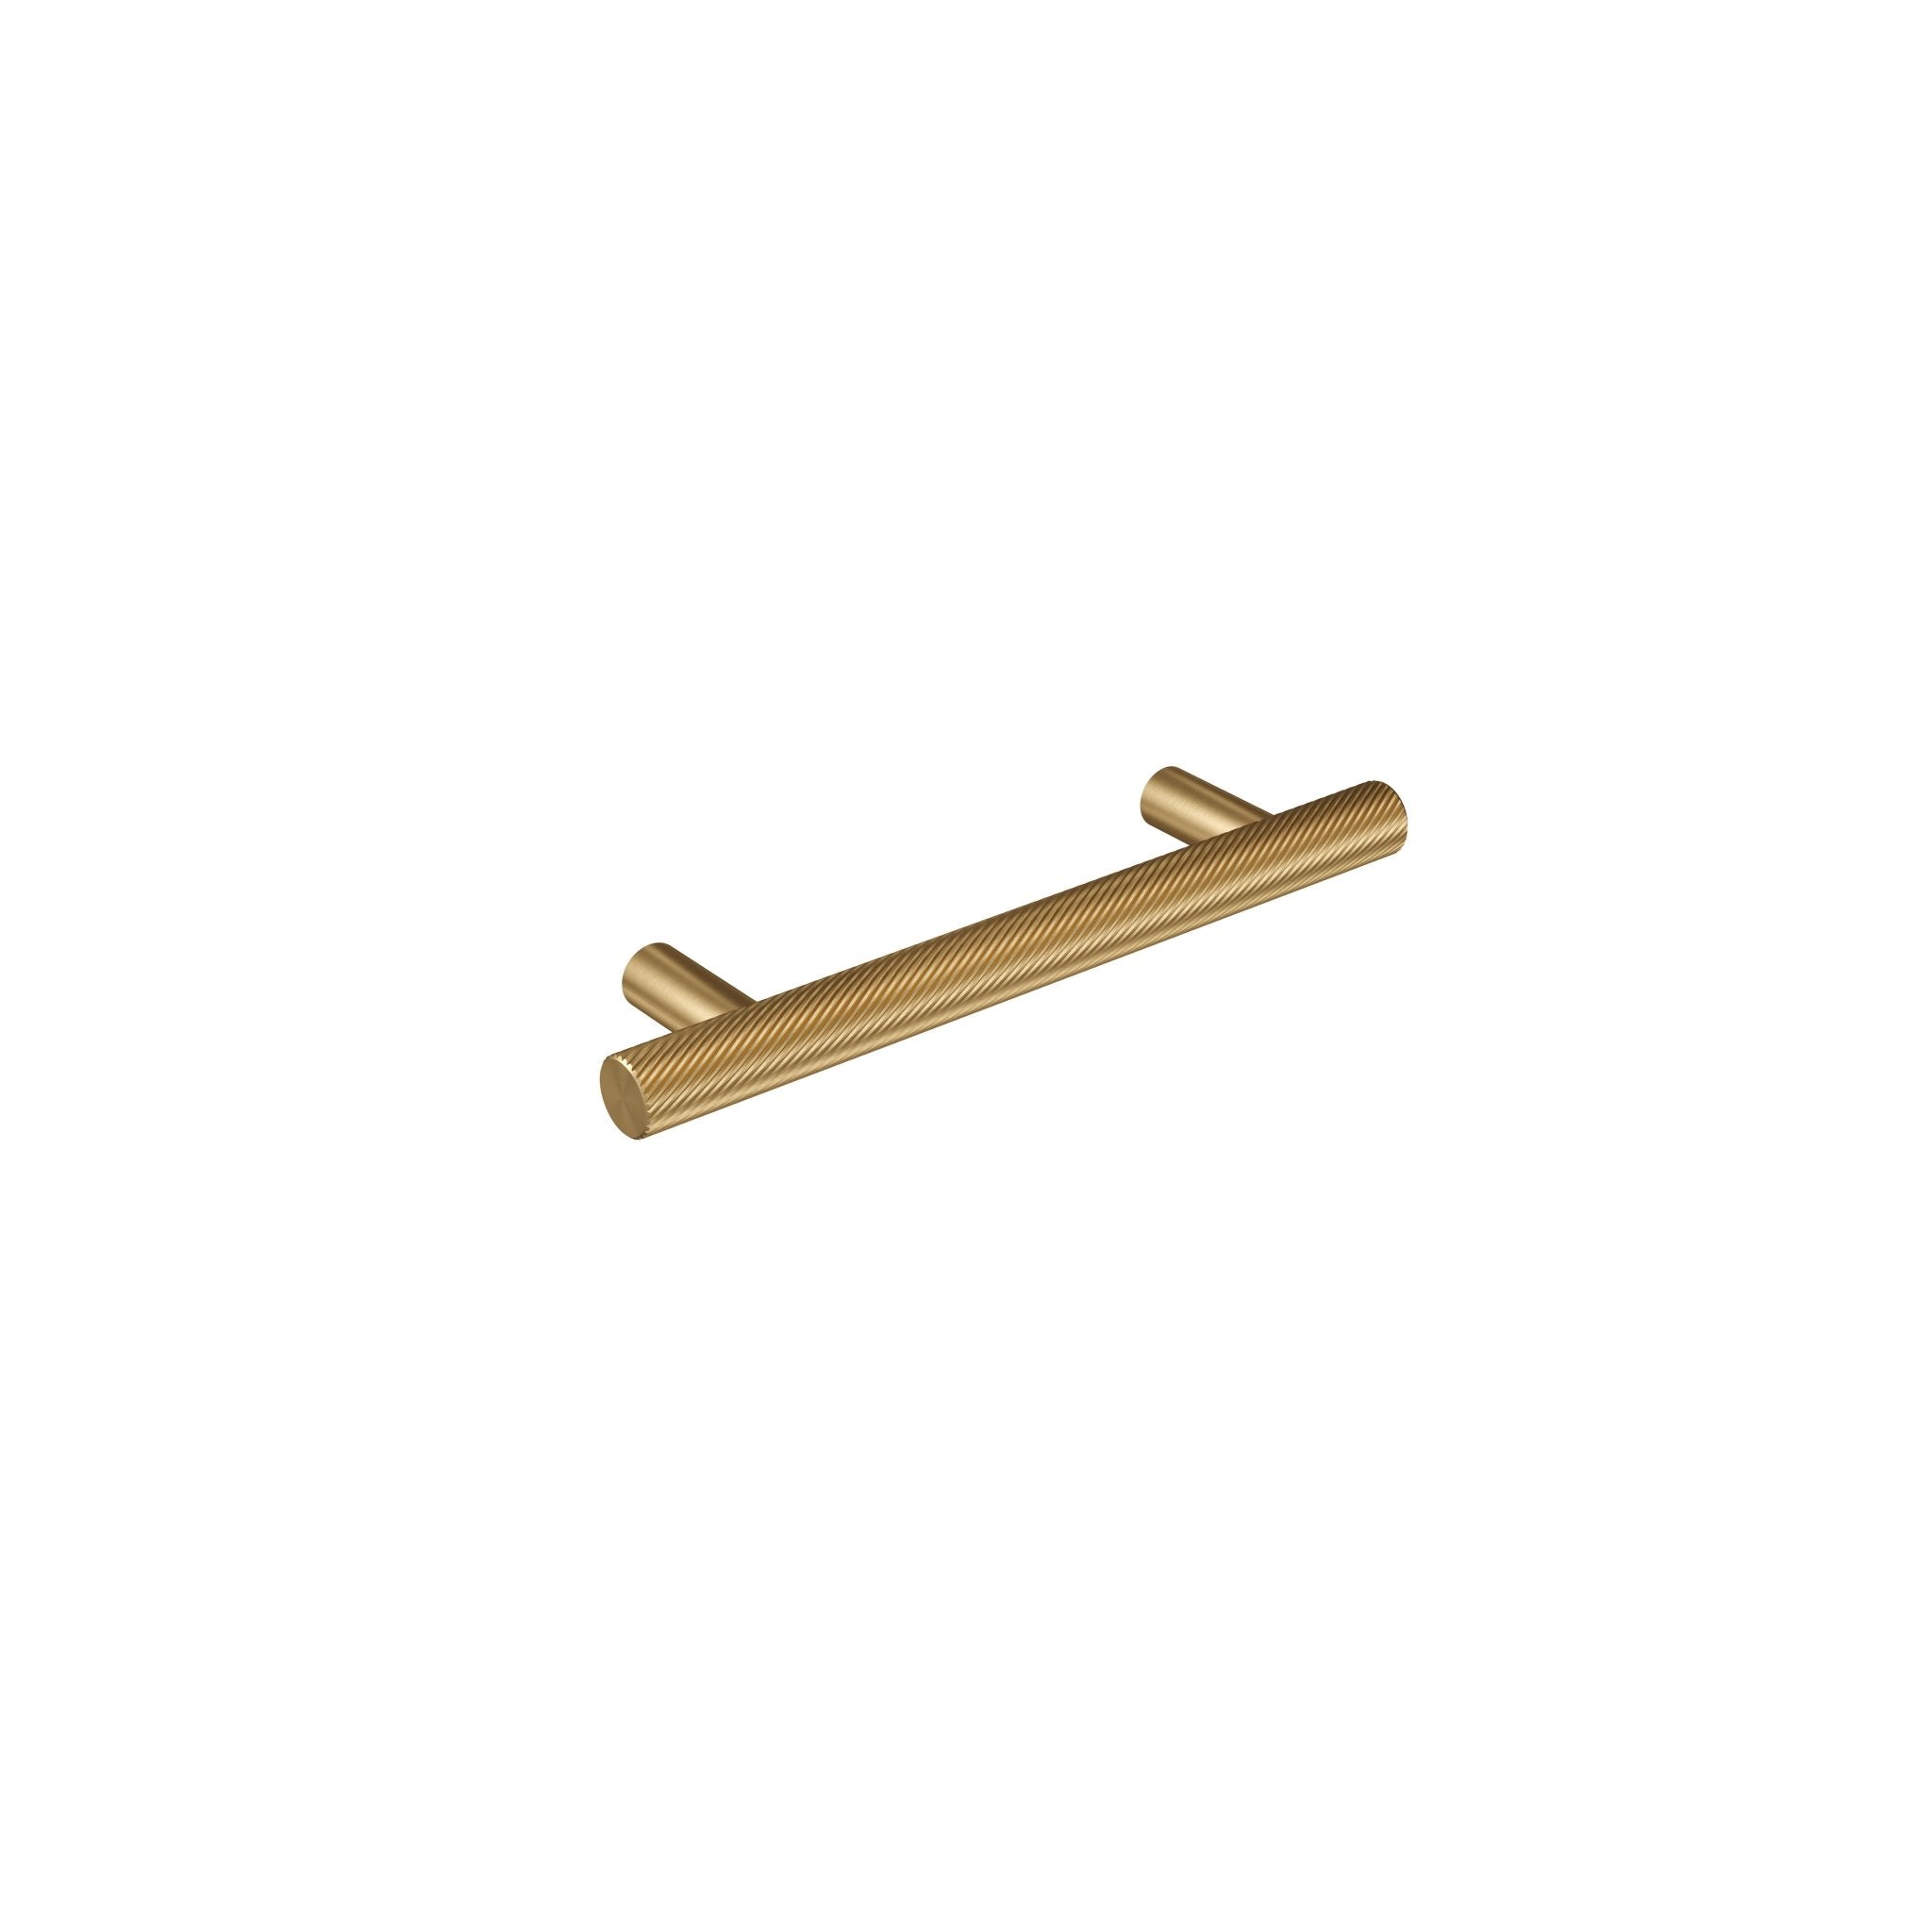 Spiral 12mm Pull Handle-Brushed Brass-140mm-The Hairpin Leg Co.